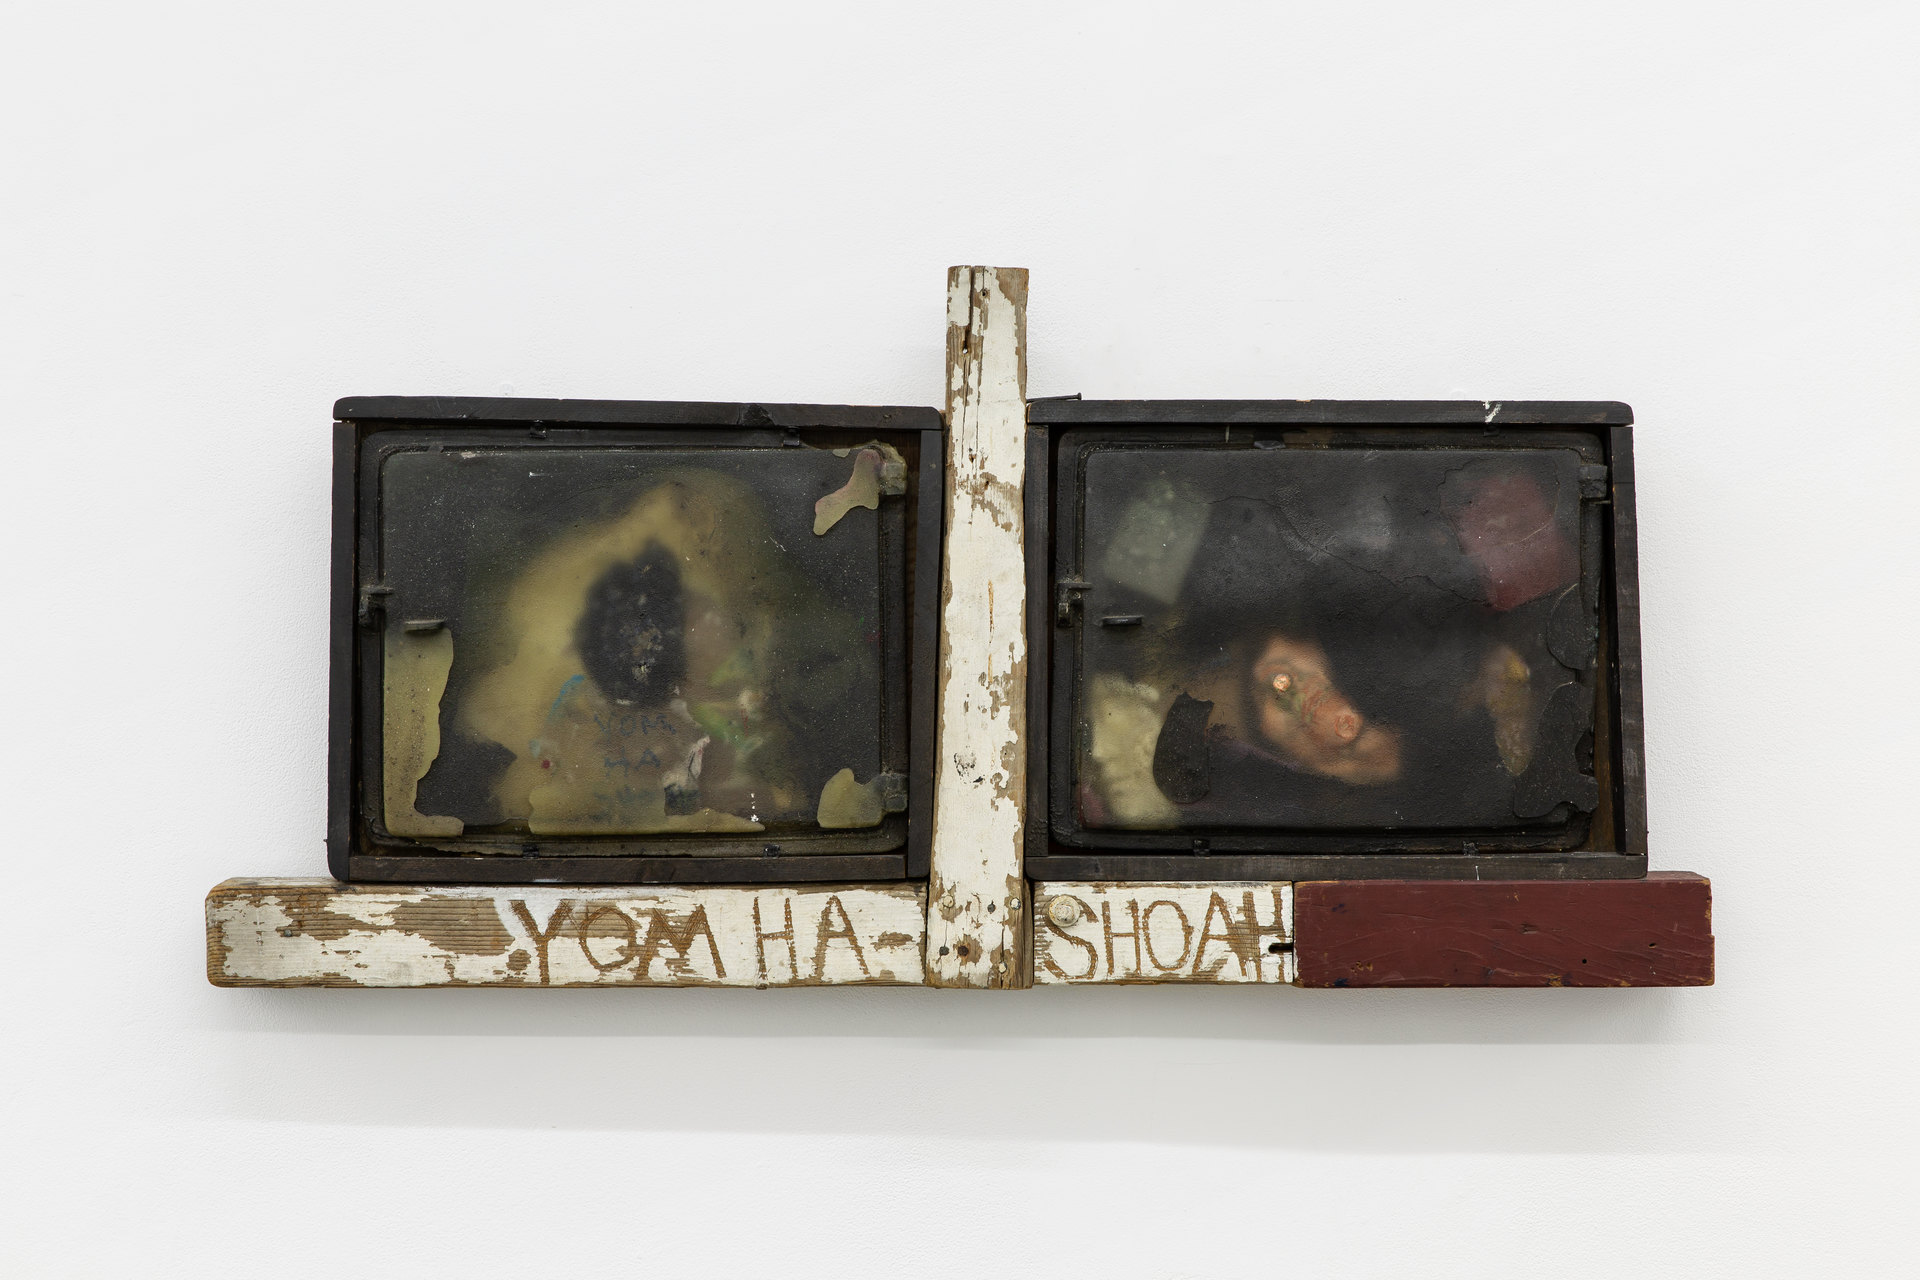 Stella Waitzkin, 'Yom Ha Shoah', n.d. (c. 1970s- 1980s), Cast polymer resin, embedded objects, wood and metal, 63.5 x 109 x 10cm, Shit and Doom - NO!art, 2019, Cell Project Space